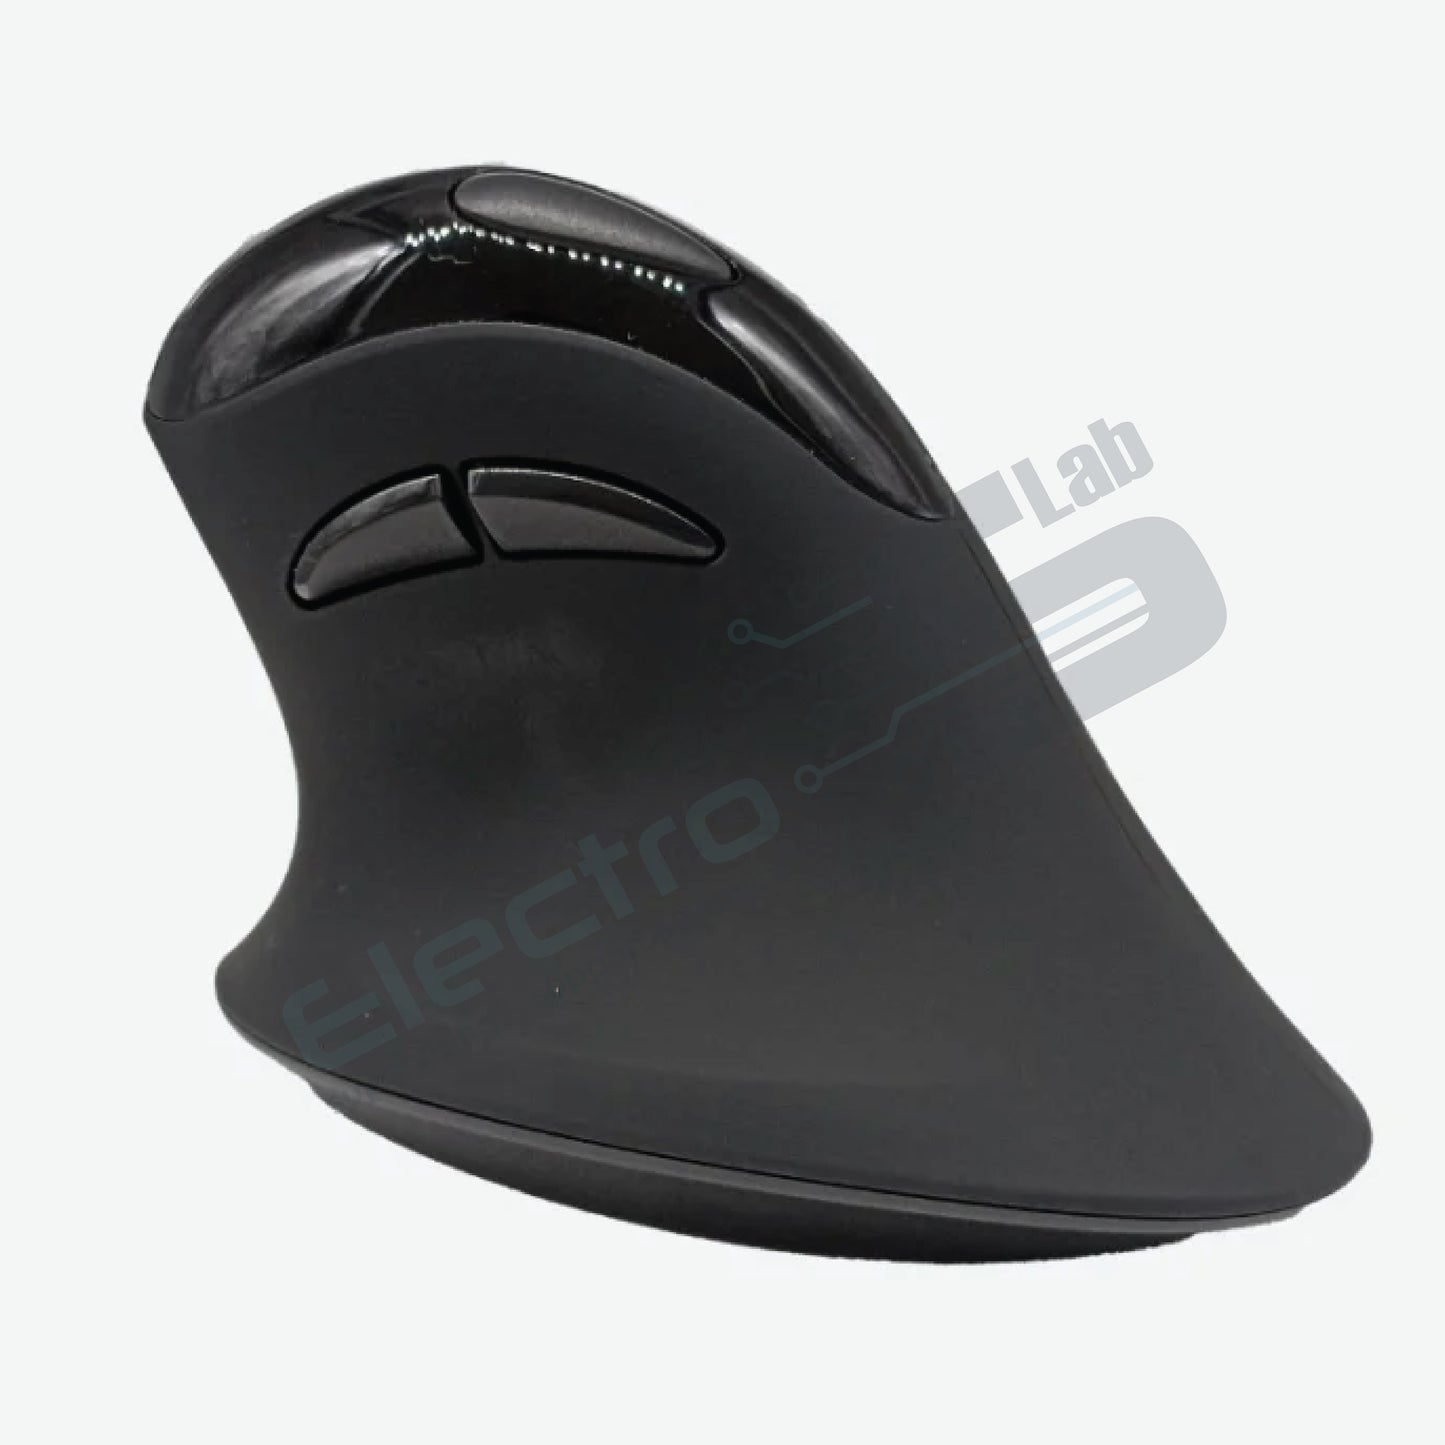 MOUSE WIRELESS USB MICROPACK MP-V03W BLACK